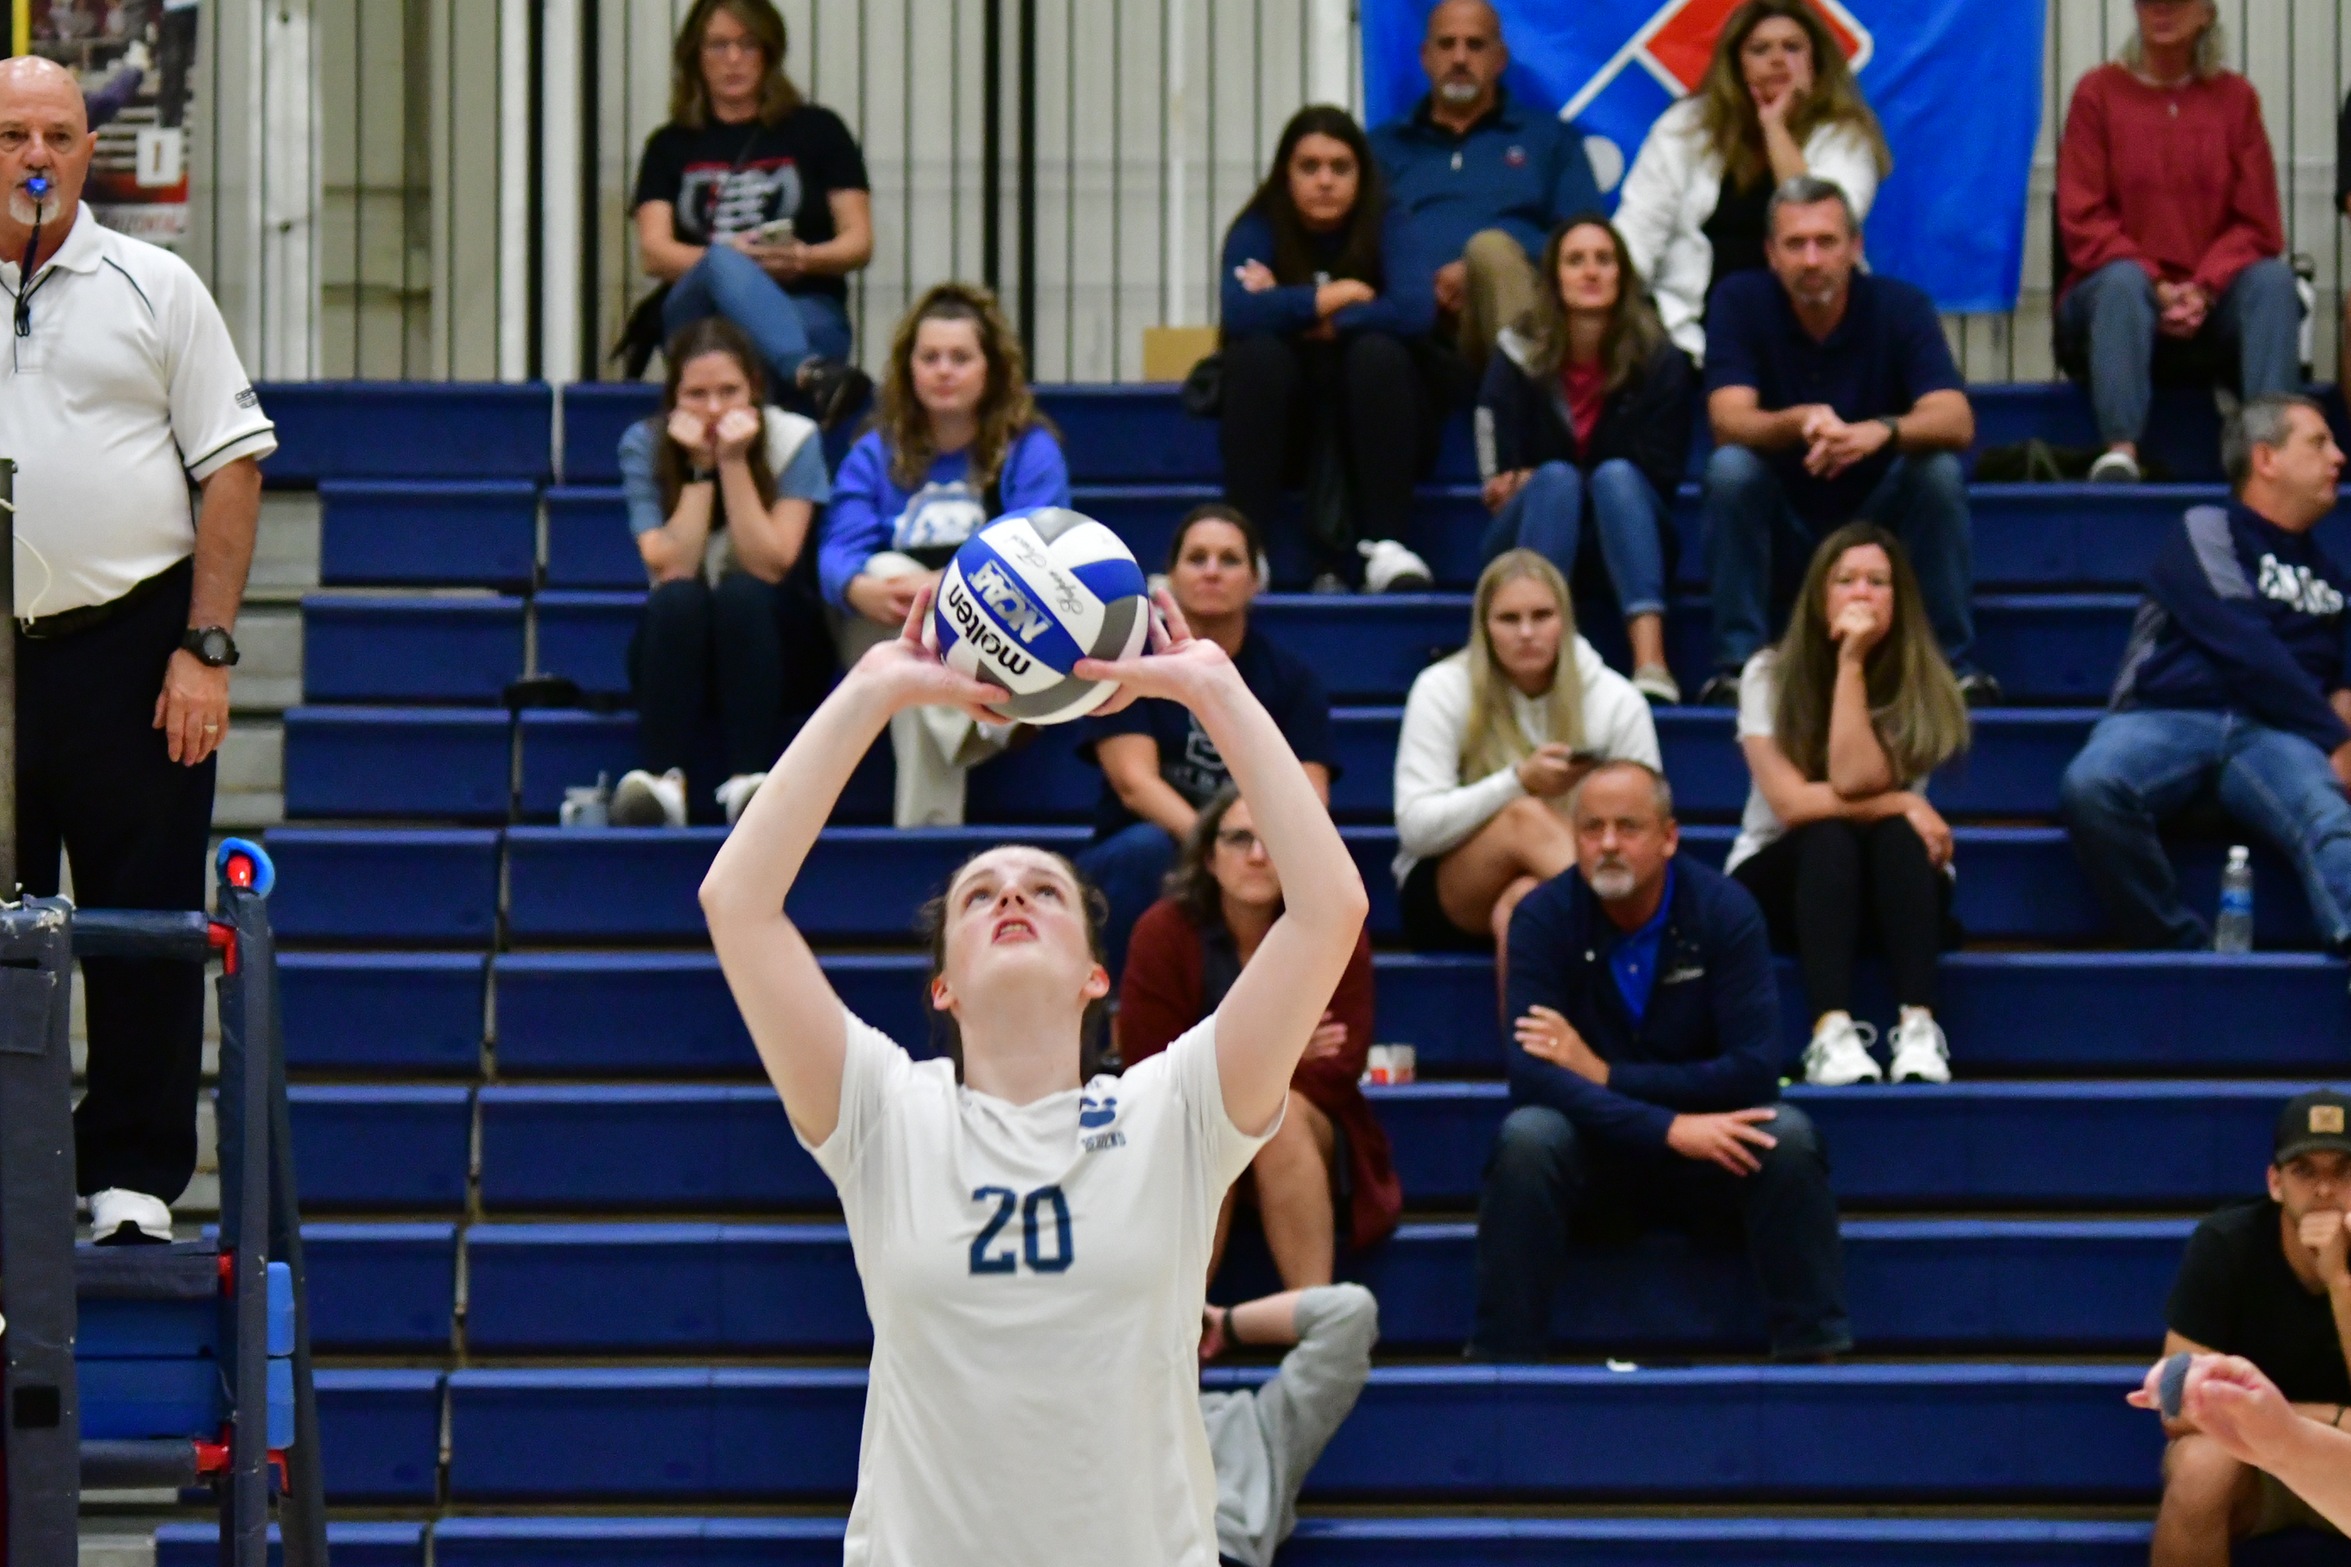 Women's Volleyball Improves to 6-1 With a Pair of Wins